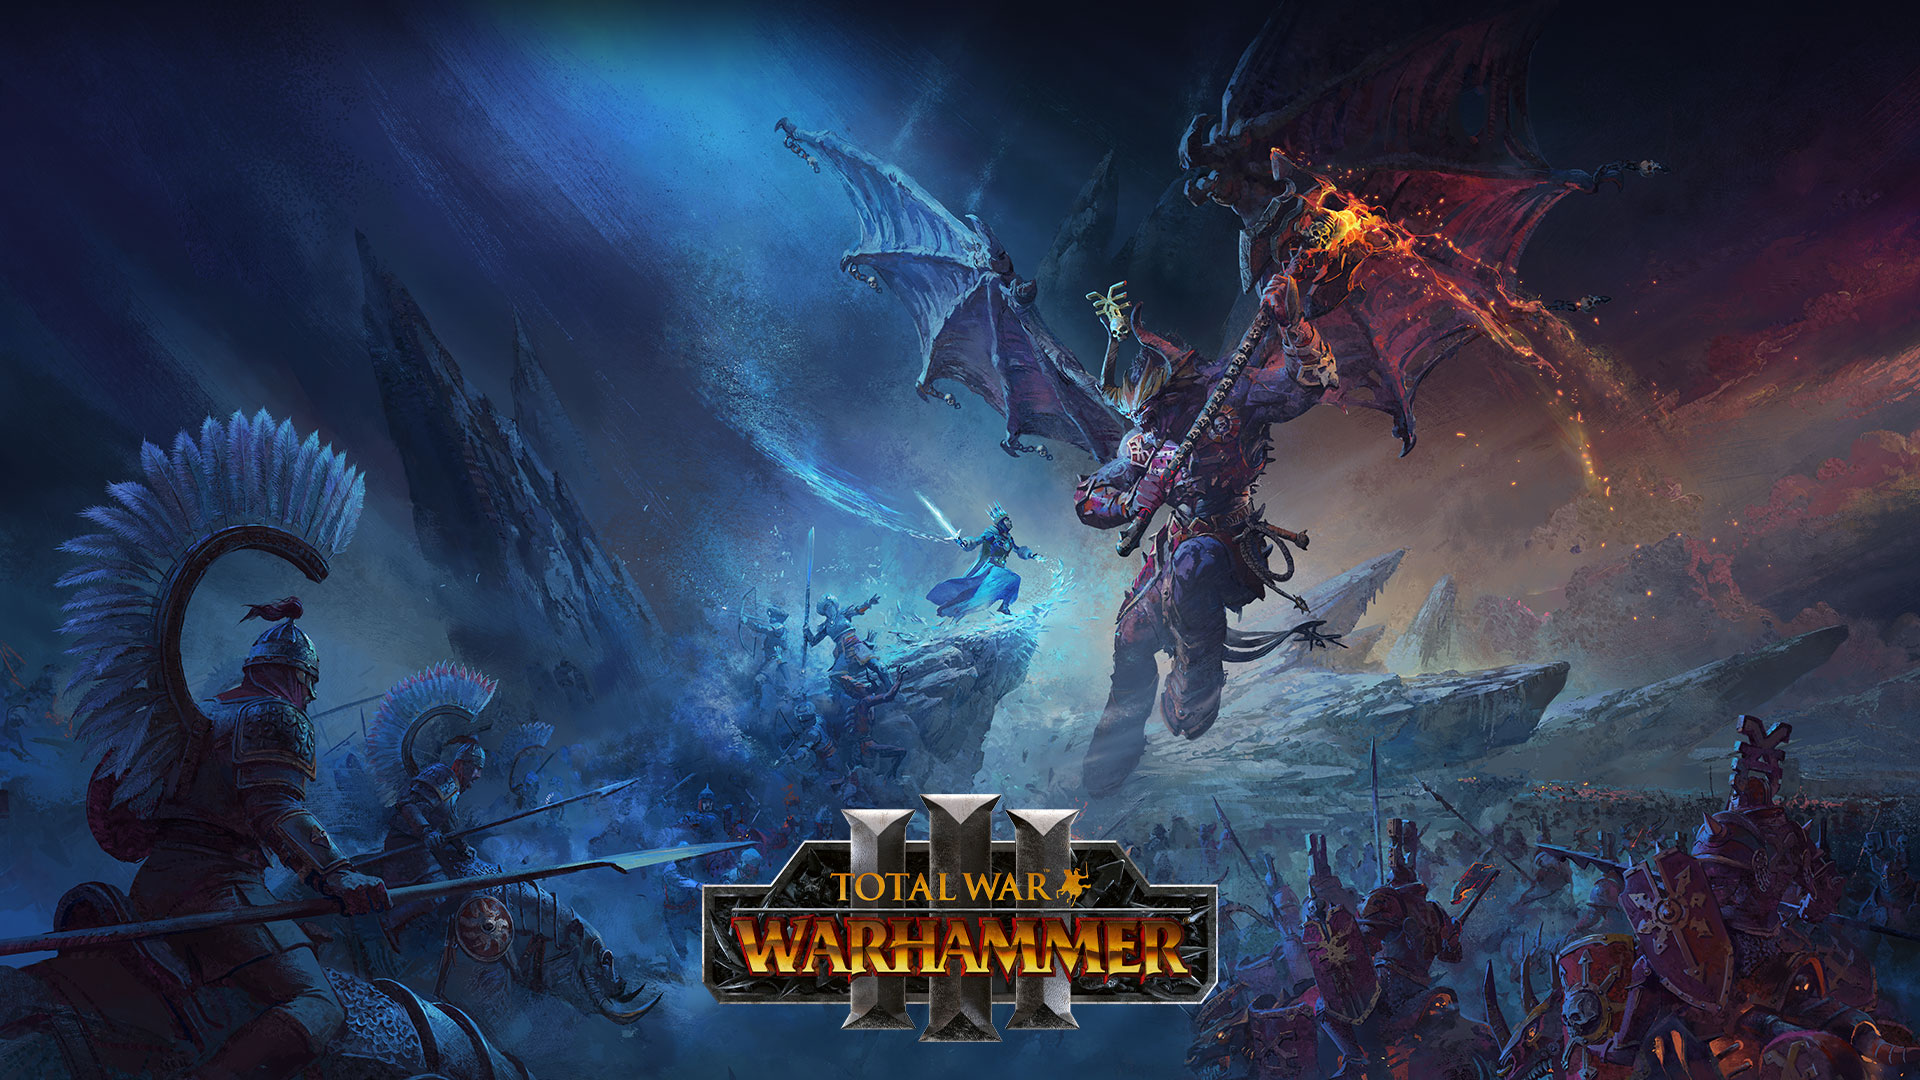 Total War Warhammer 3, An ice wizard faces off against a giant dragon demon above a battlefield. 